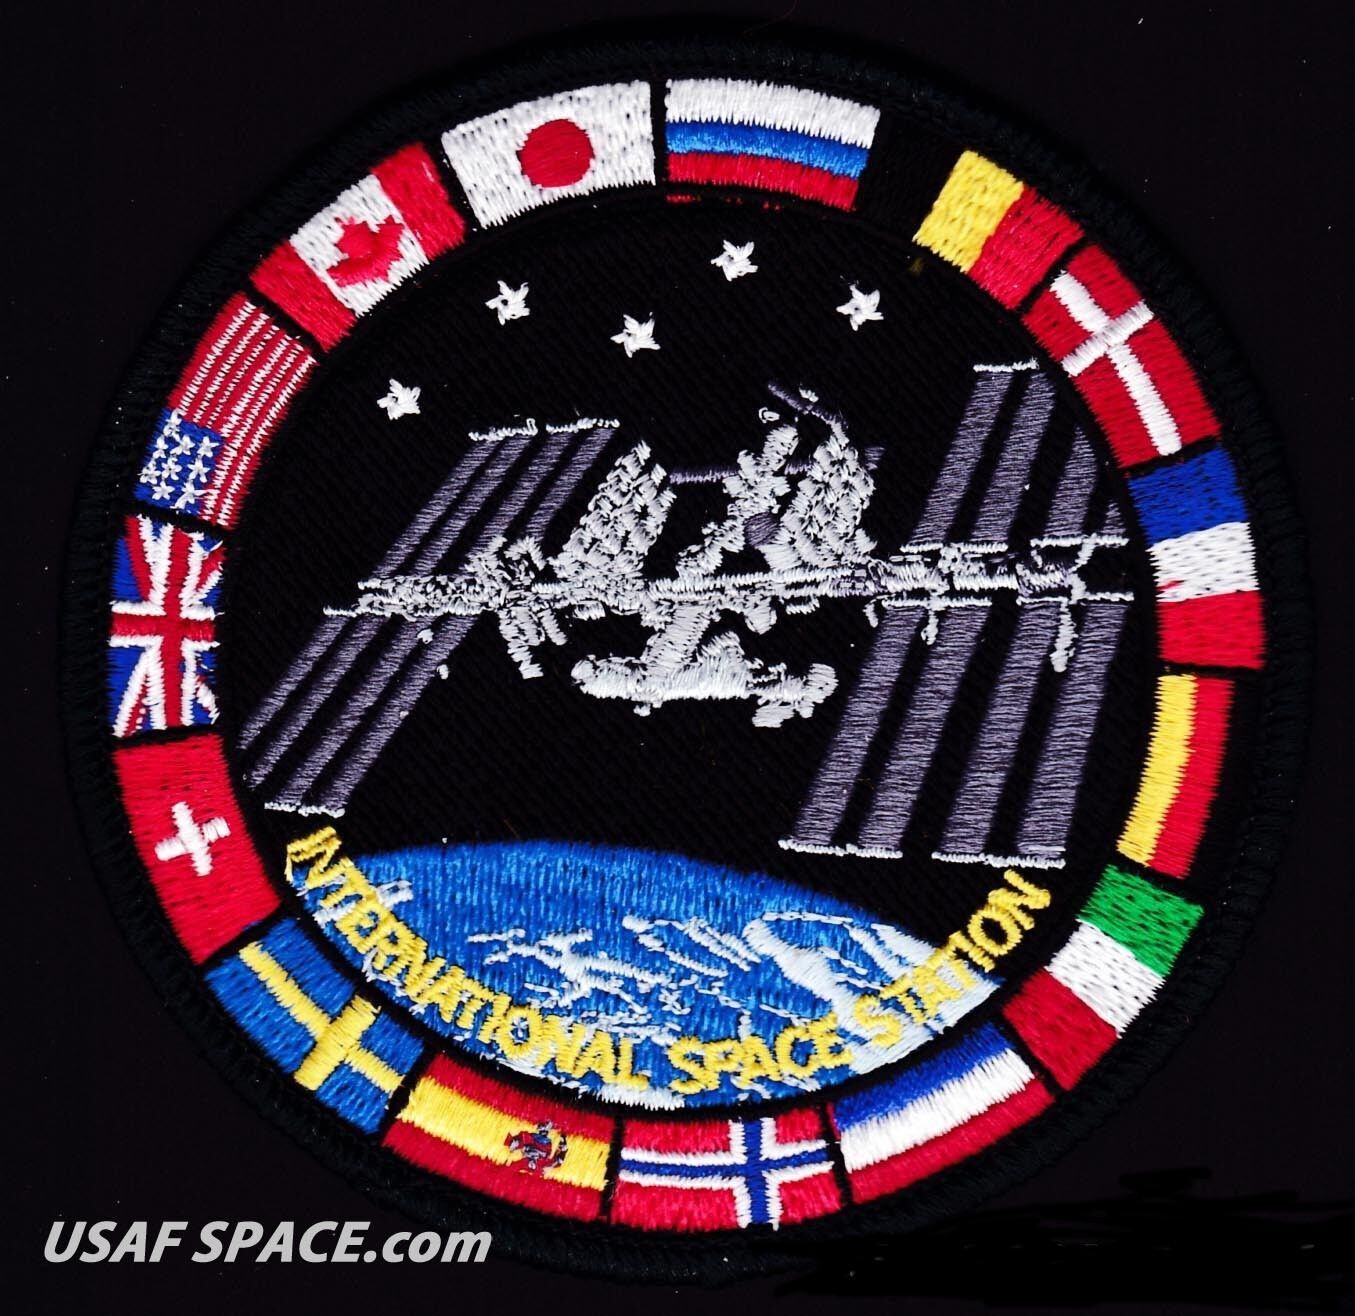 AUTHENTIC AB Emblem FLAGS - ISS - International Space Station- SPACEX NASA PATCH